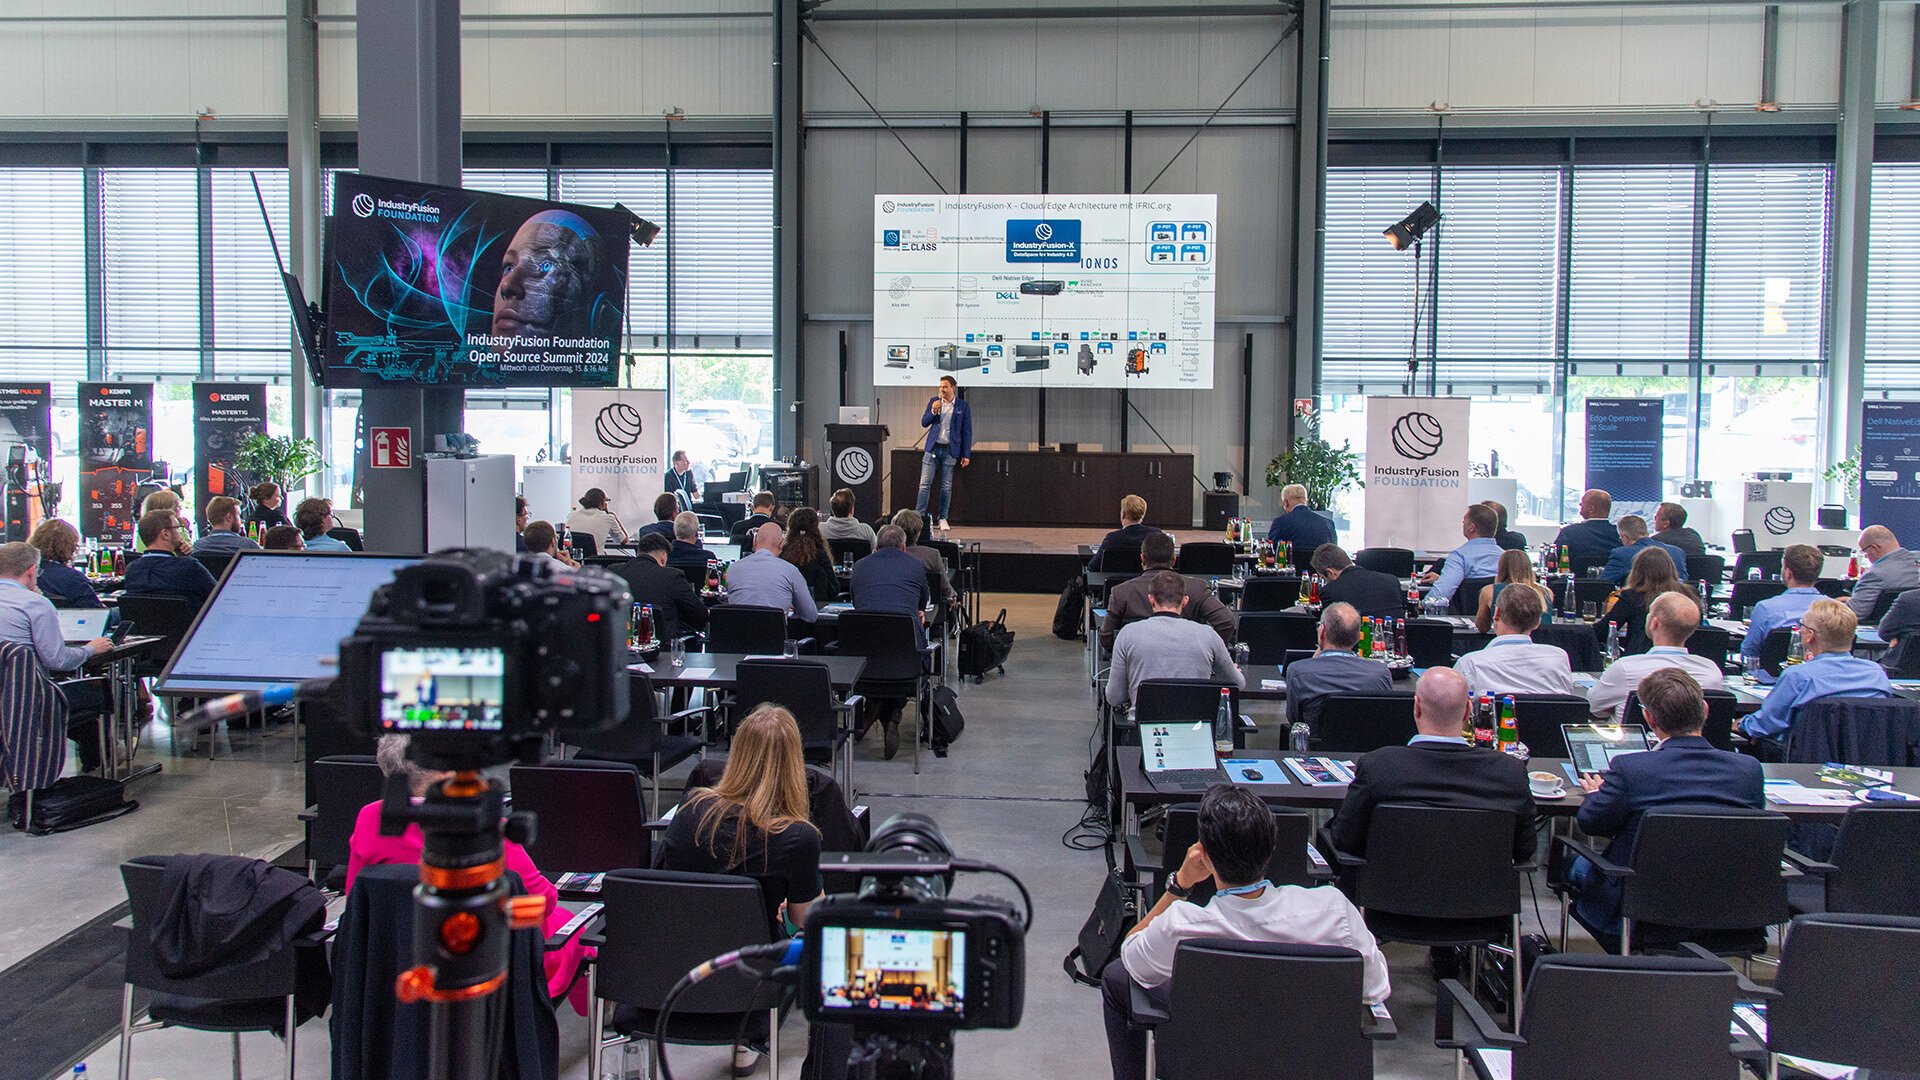 Open Source Summit: Concrete implementation of Industry 4.0 in SMEs